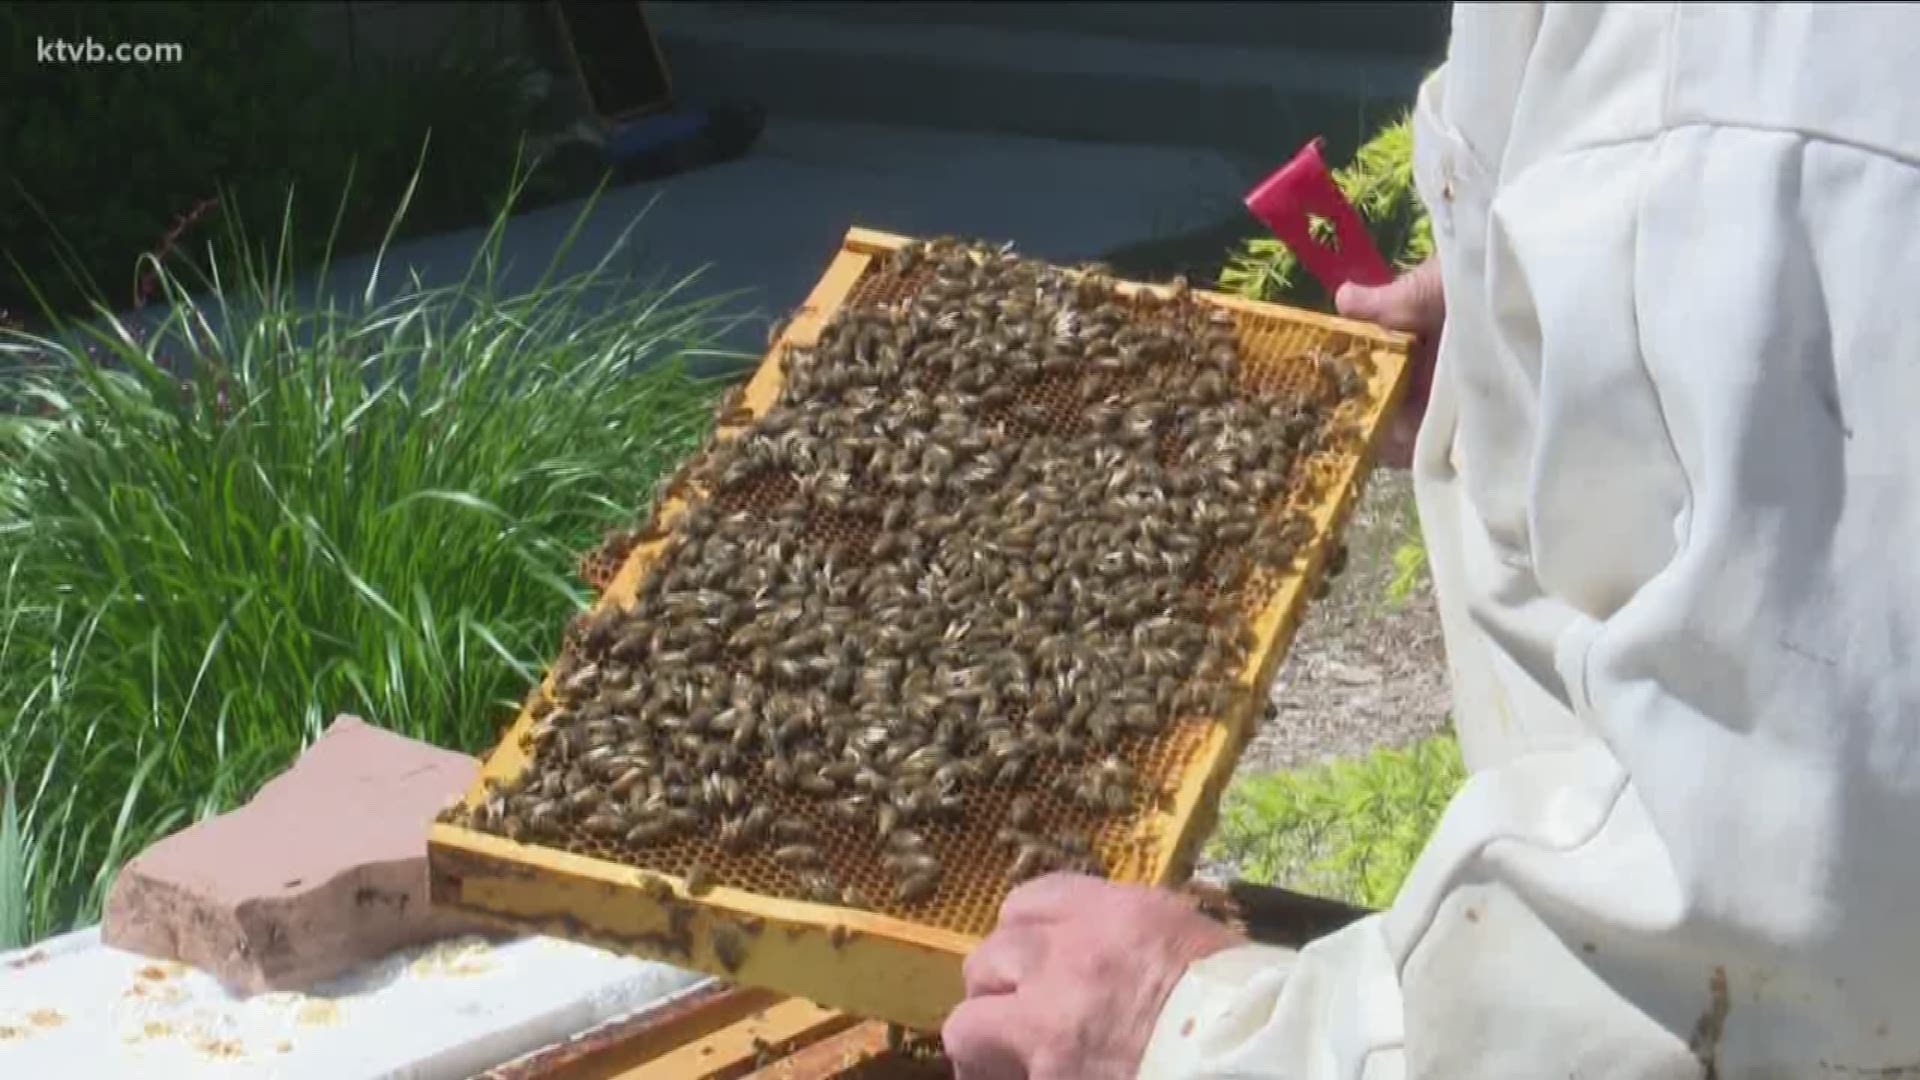 KTVB spokes with a local beekeeper to get his take on the issue.